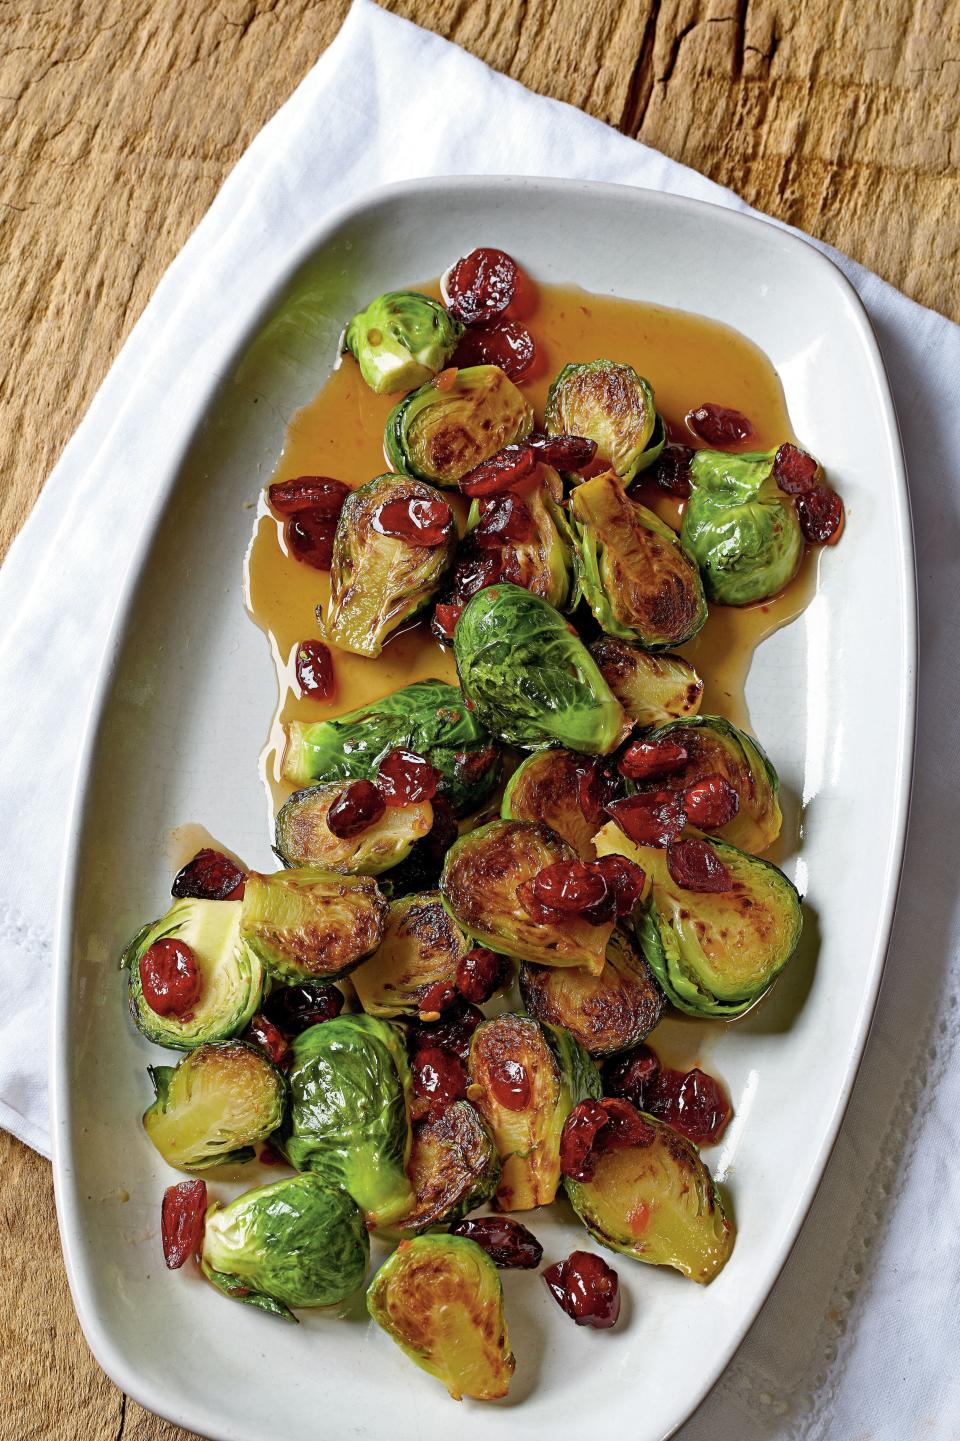 Asian-Roasted Brussels Sprouts with Cranberries